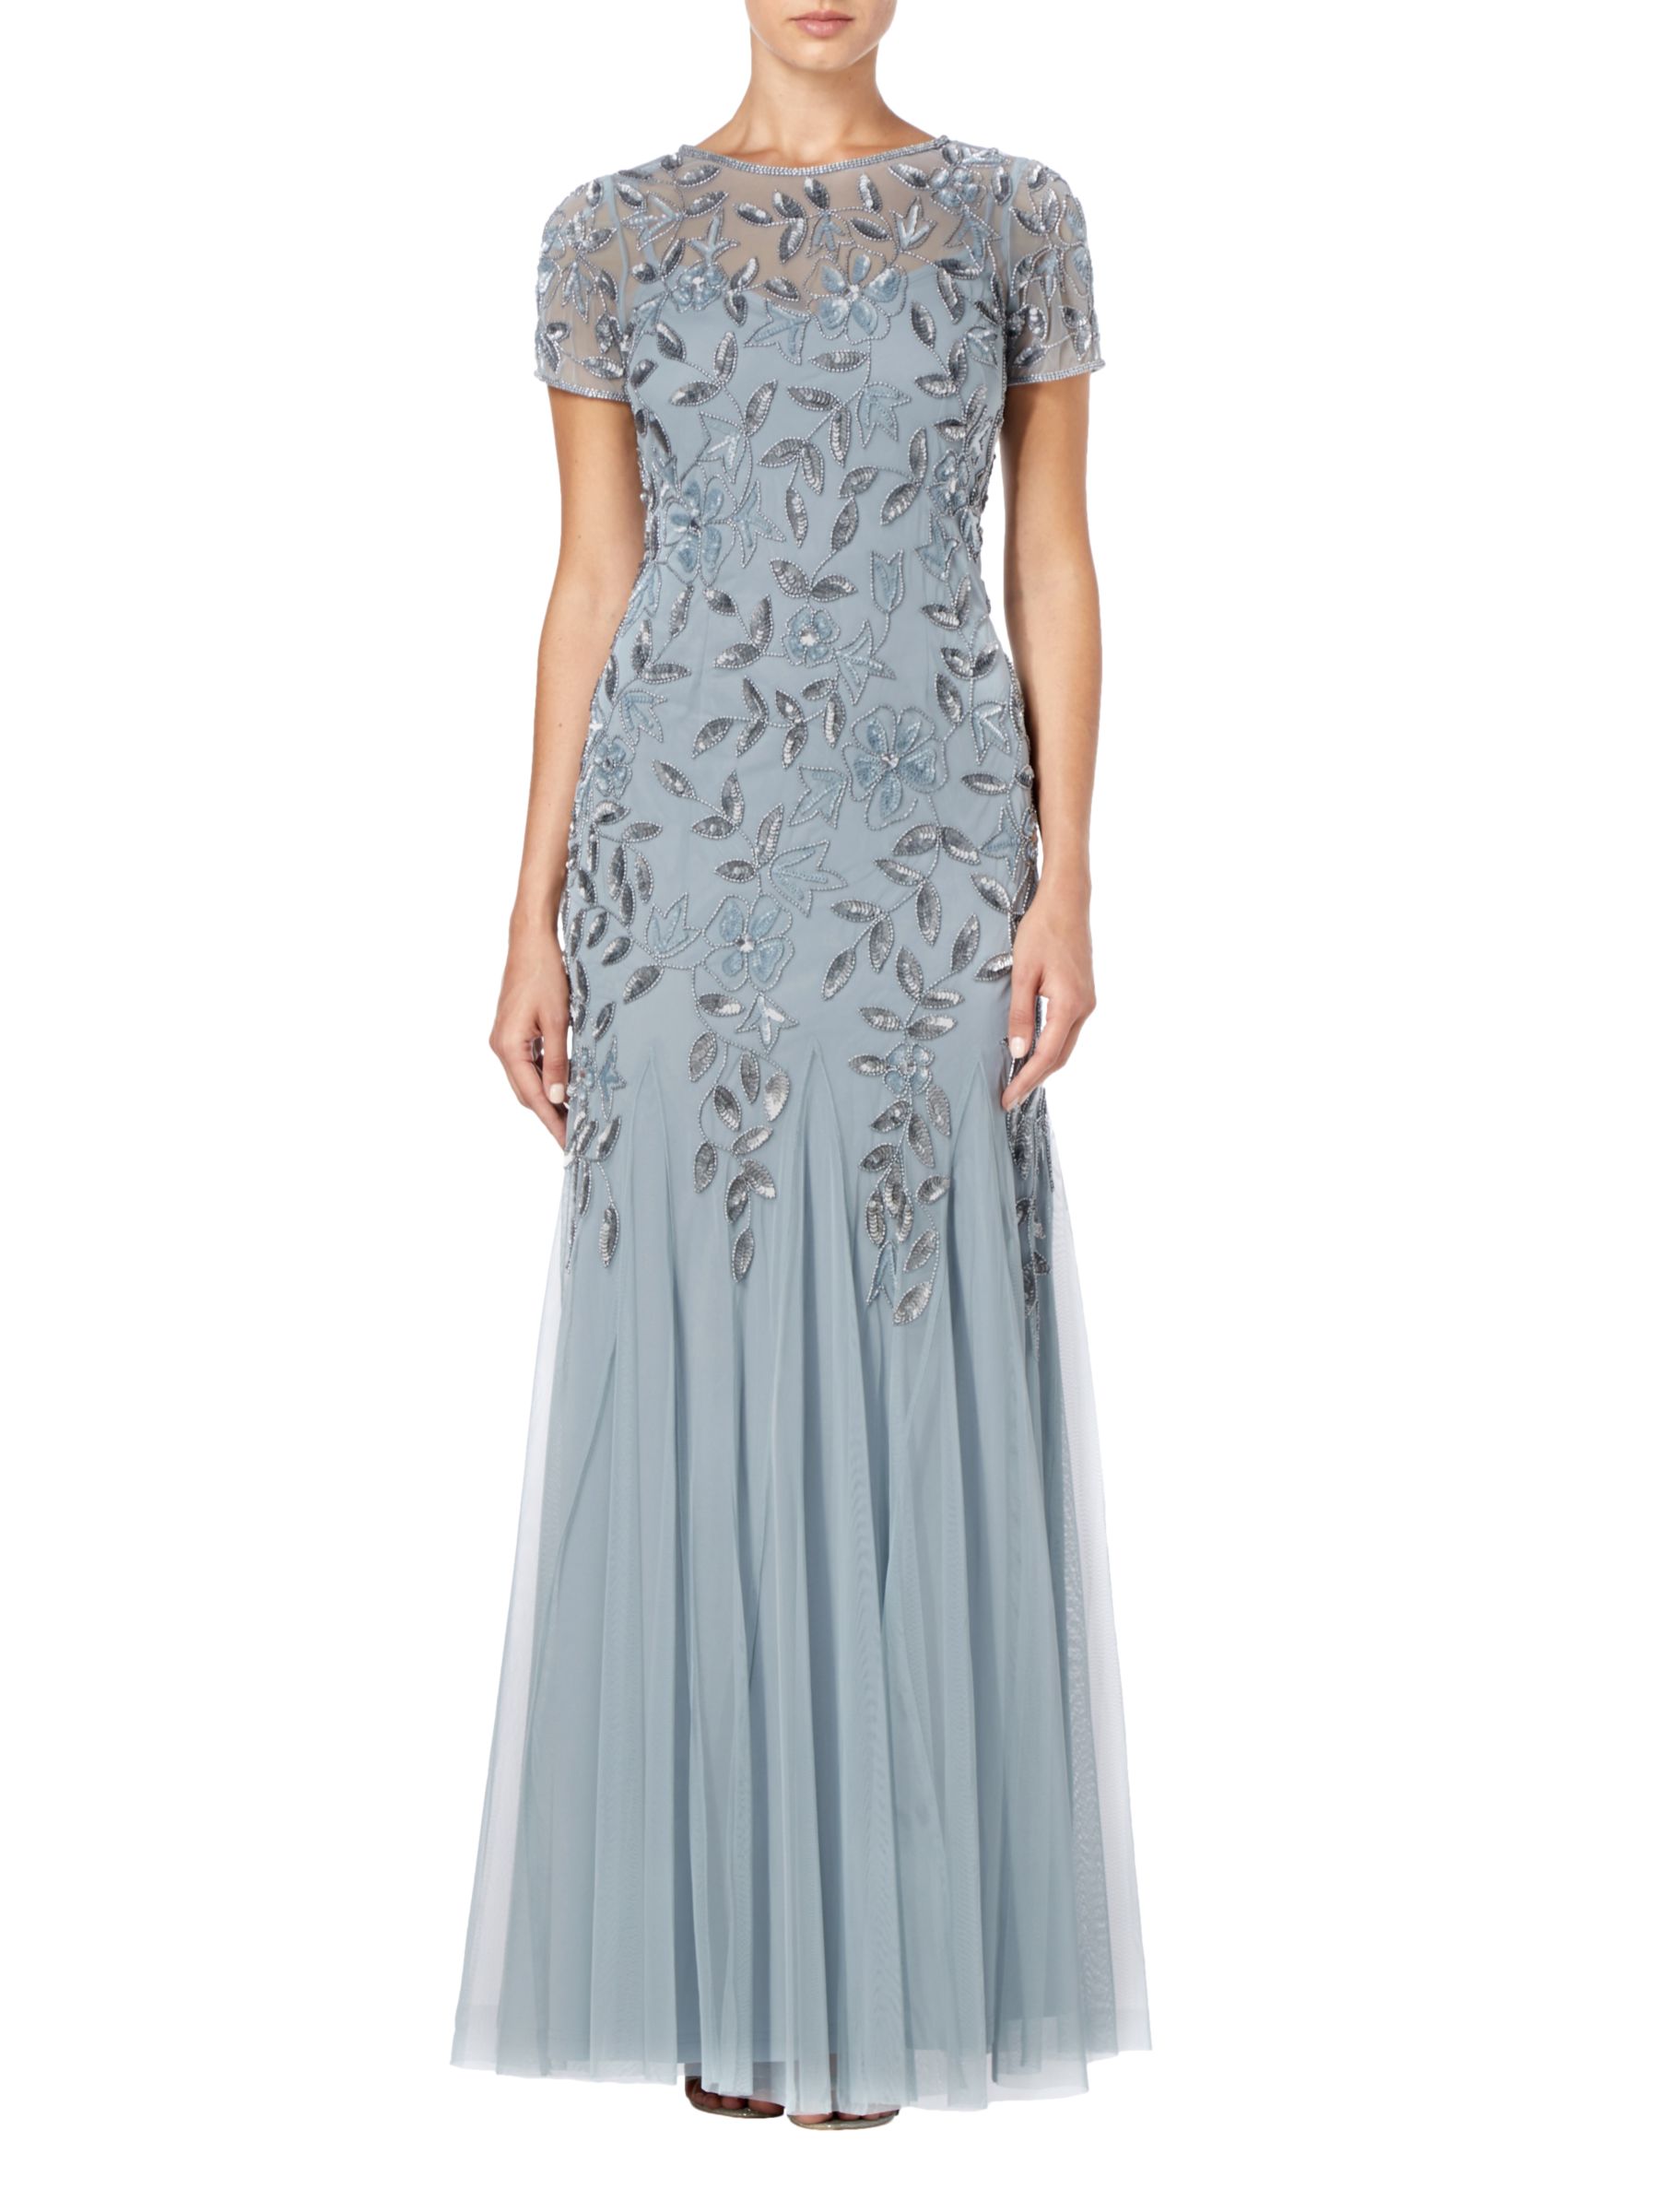 Adrianna Papell Floral Beaded Godet Dress, Blue Heather at John Lewis ...